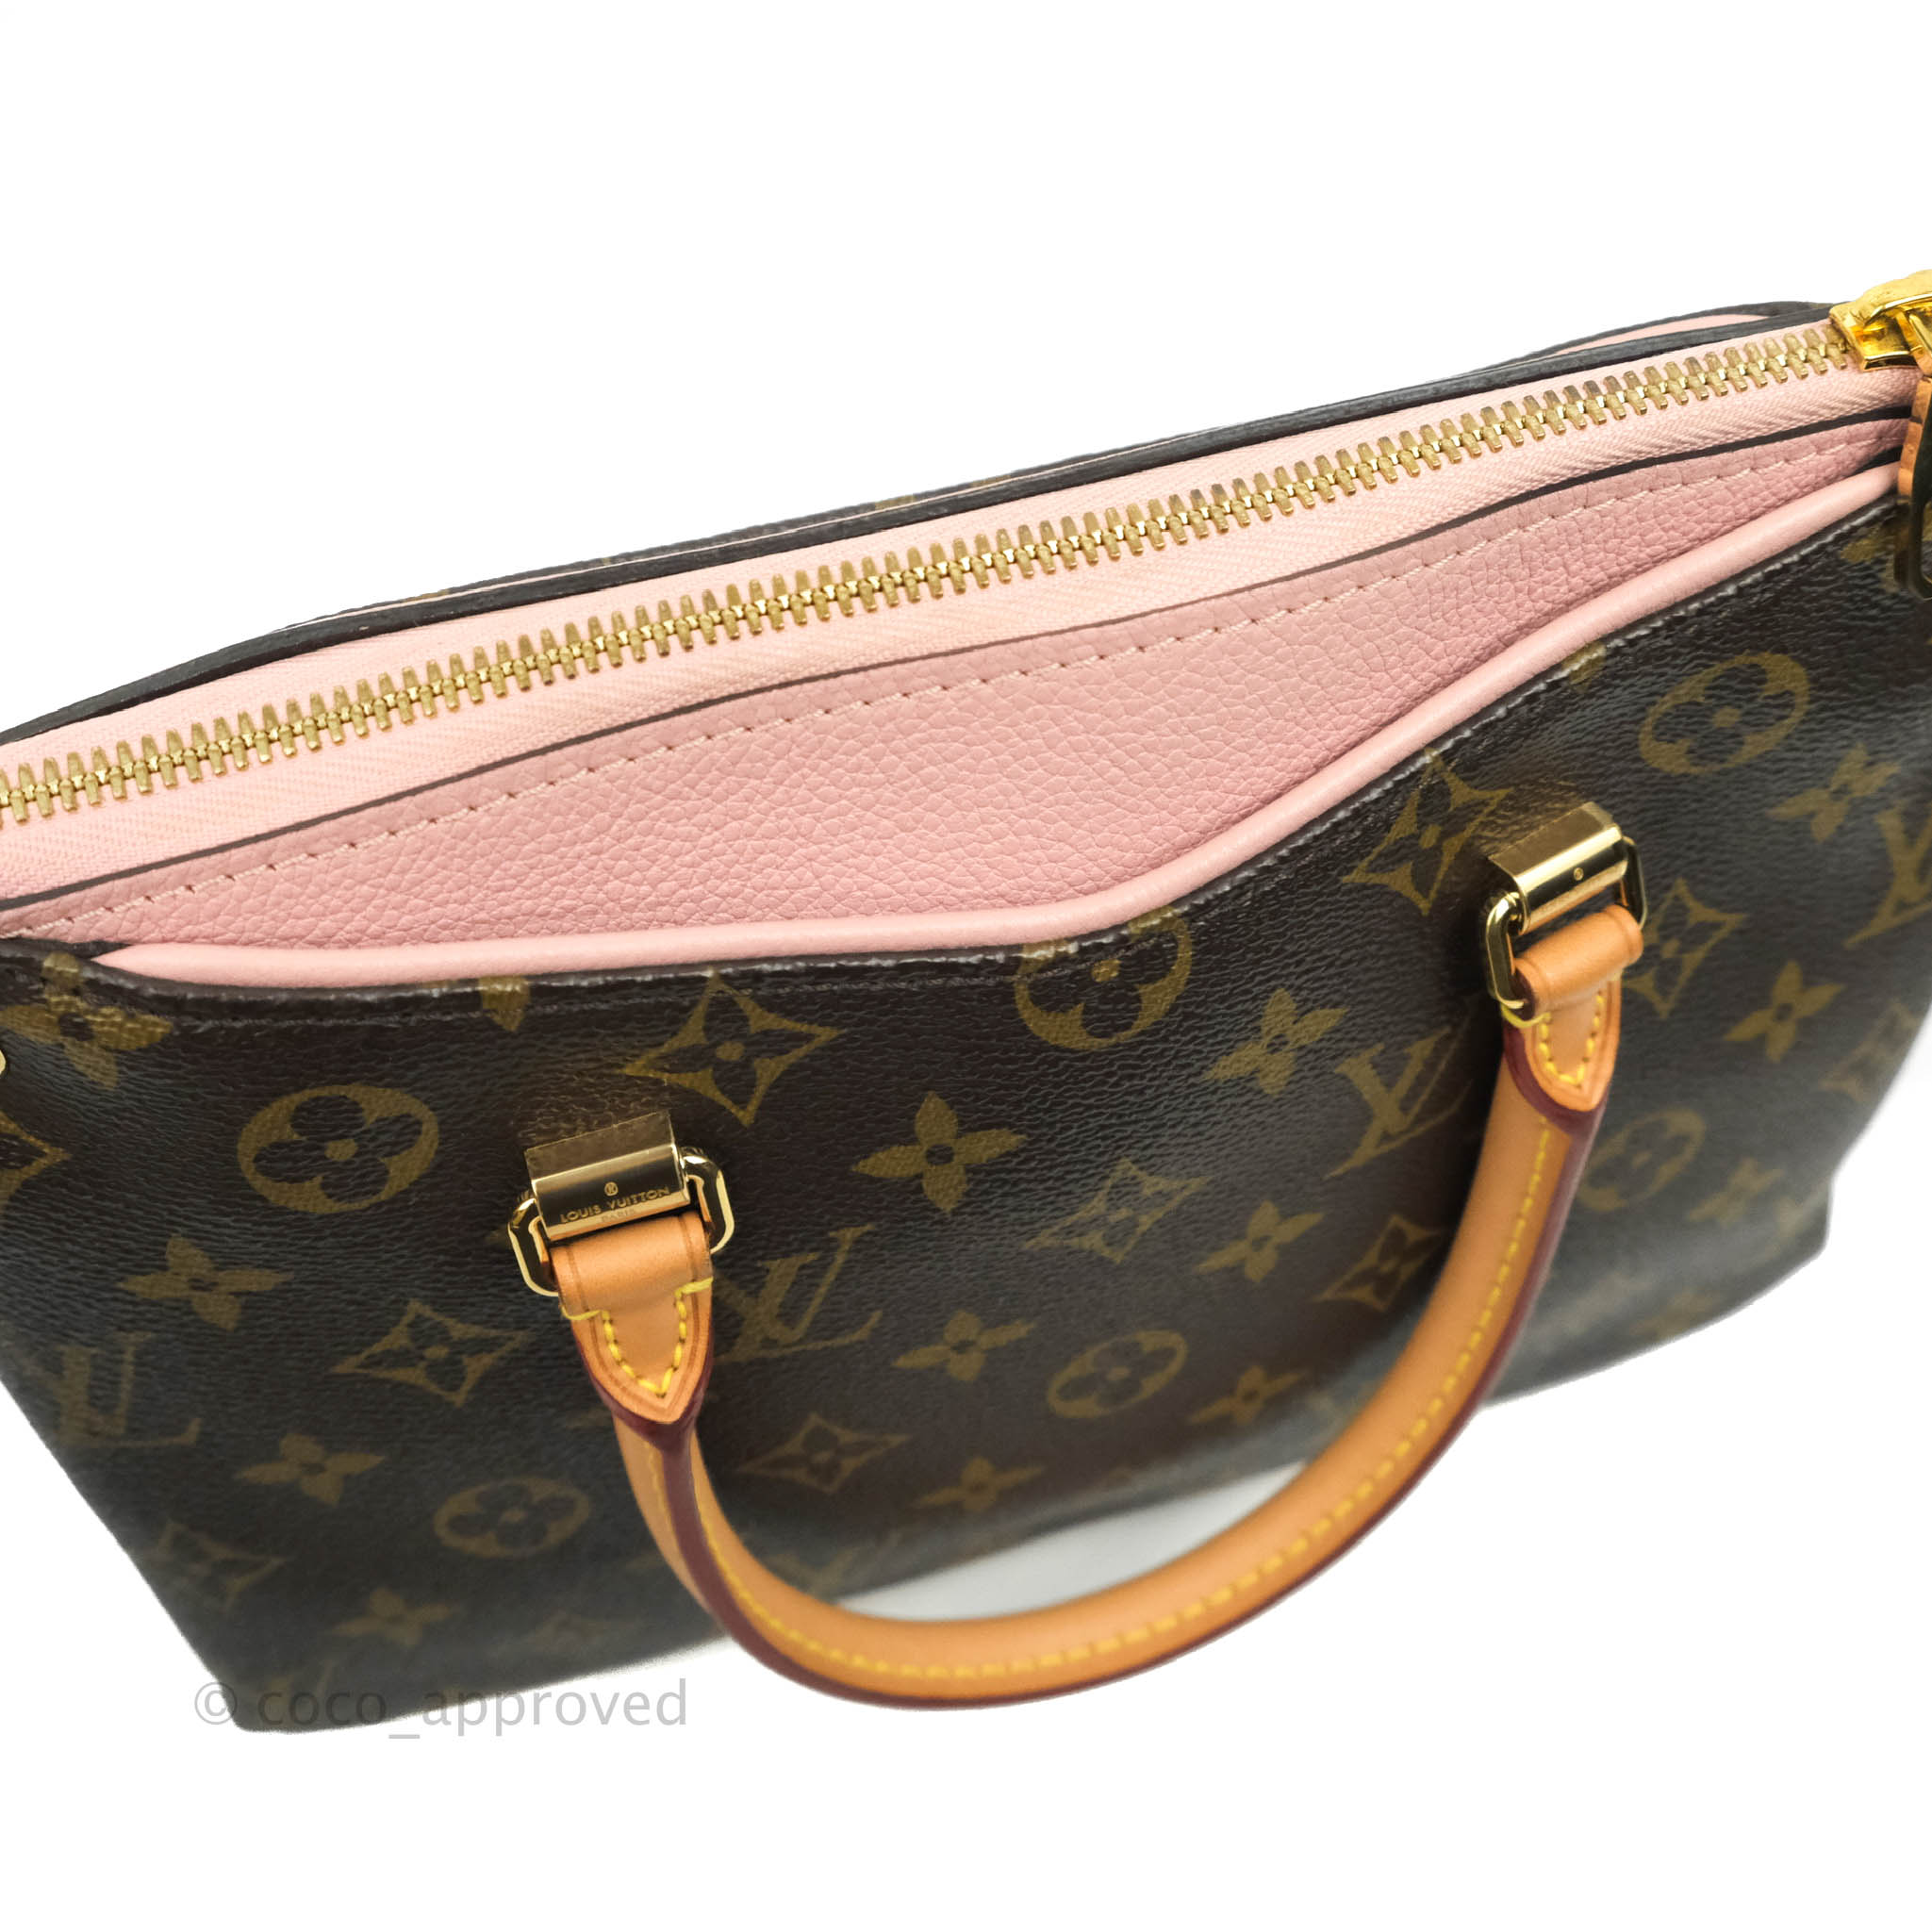 LV Pallas BB Pink Monogram Canvas Shoulder Bag With Twilly – Coco Approved  Studio